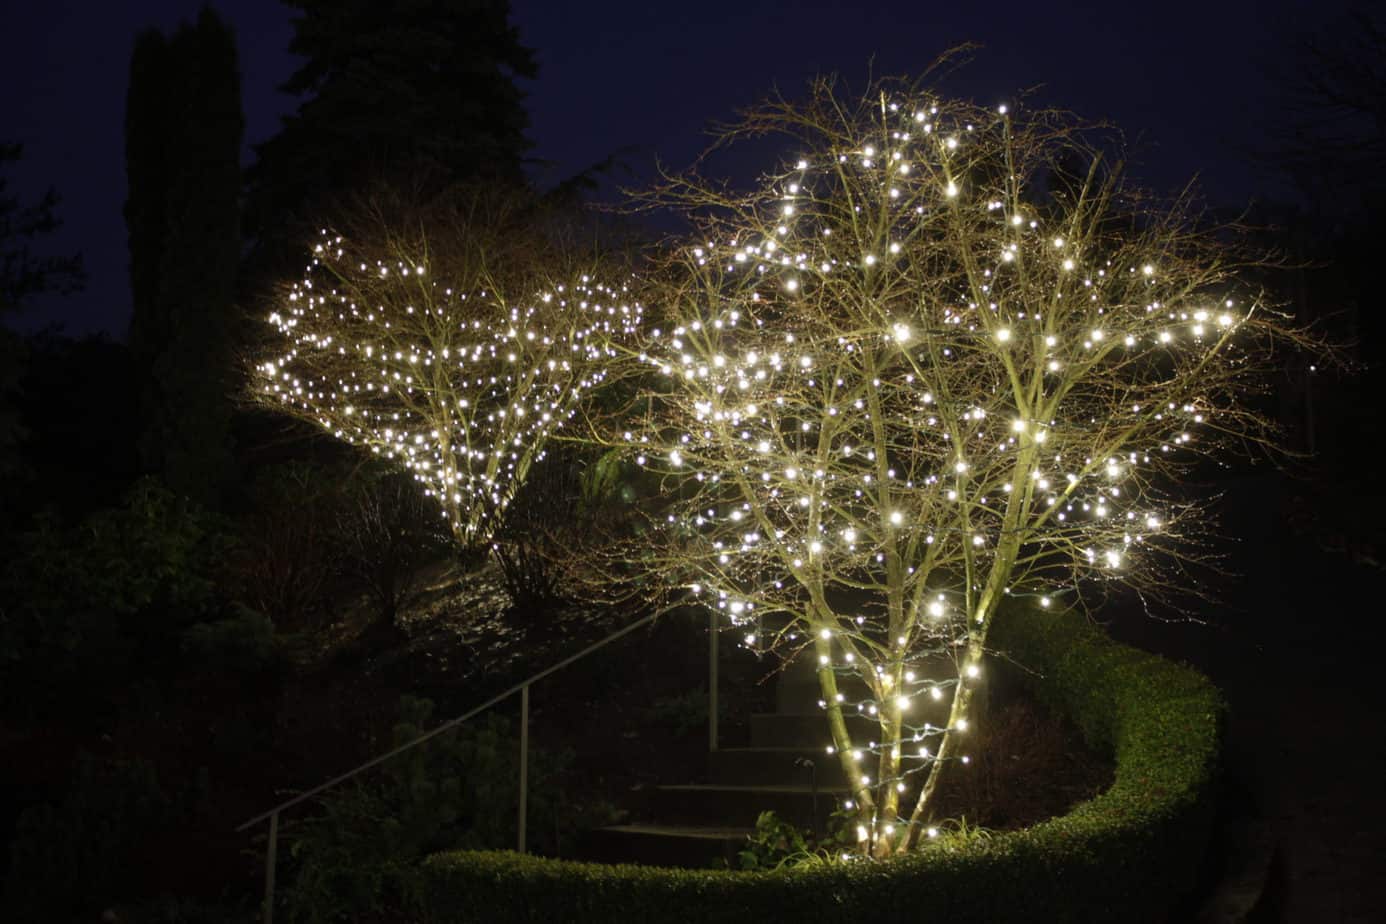 Garden trees wrapped with Christmas lights